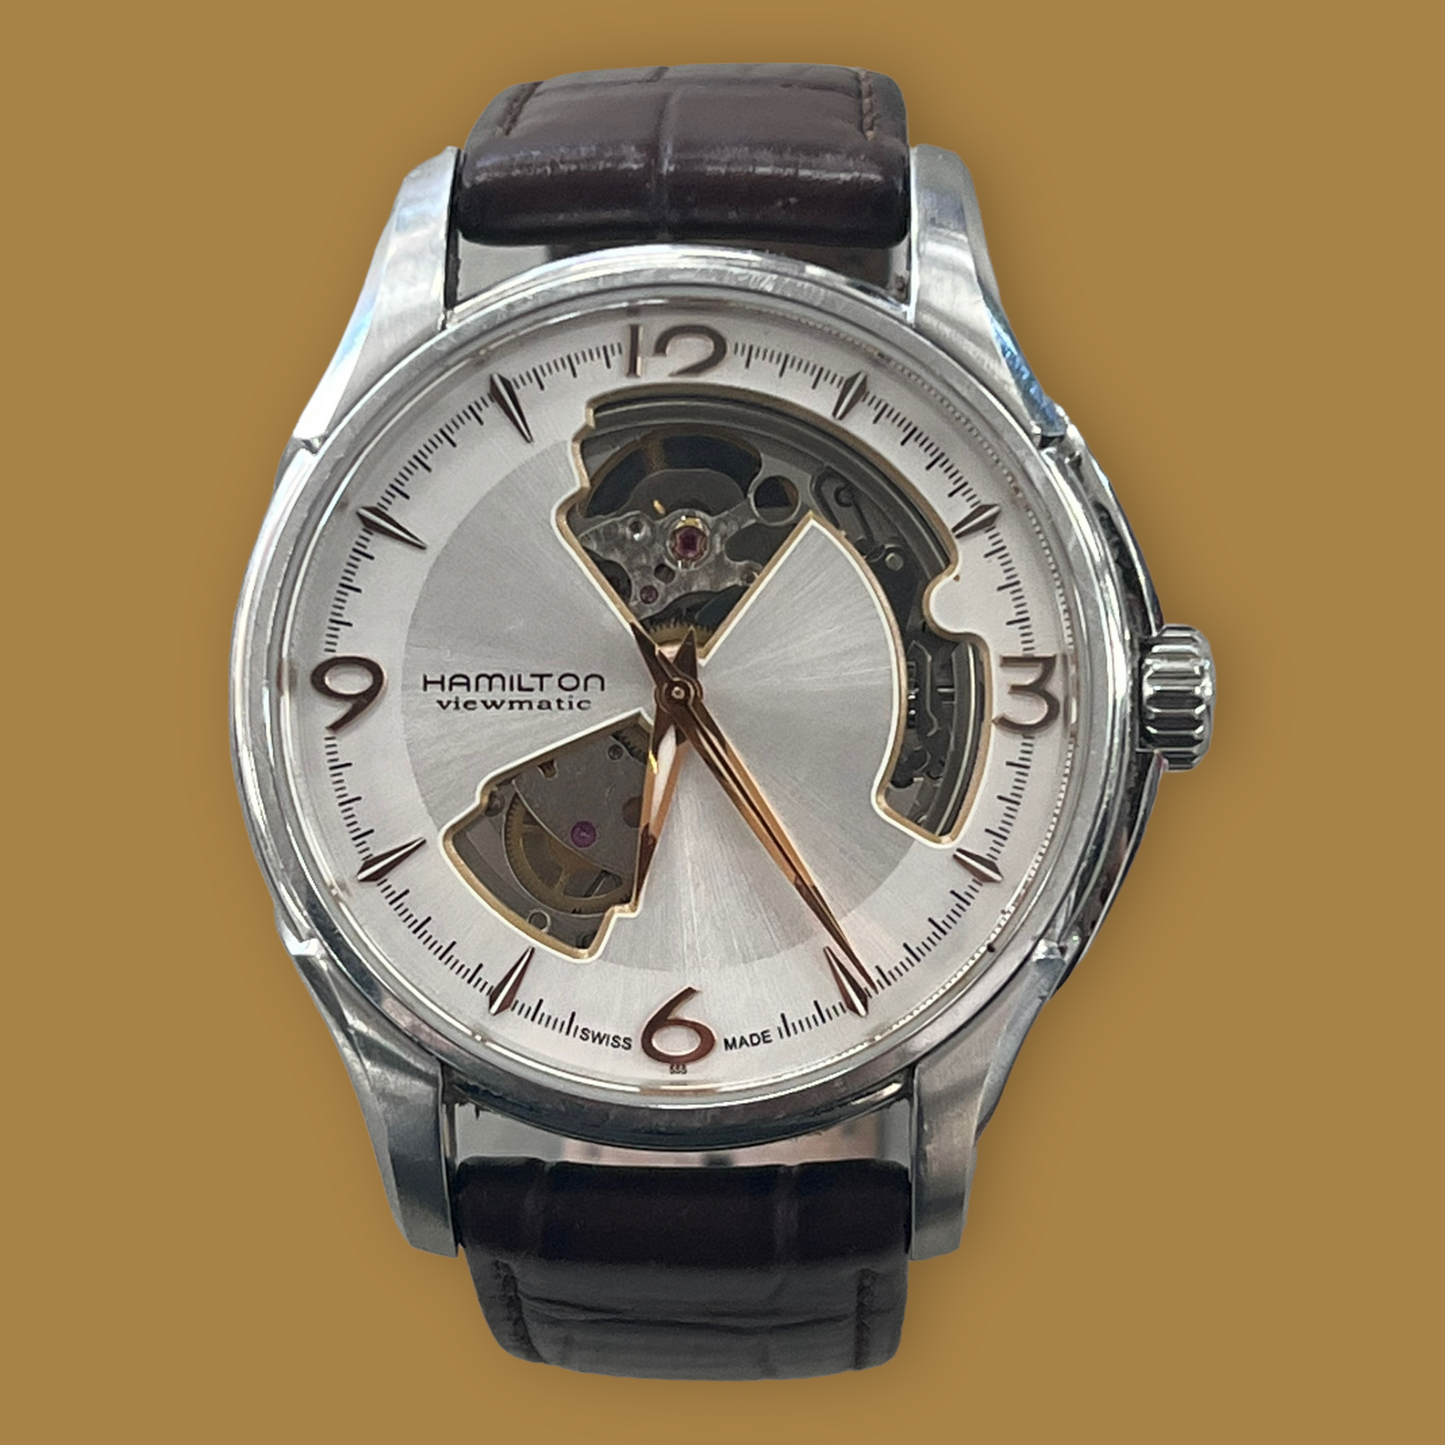 RESALE Hamilton Jazzmaster Viewmatic H325650 Open Heart Automatic